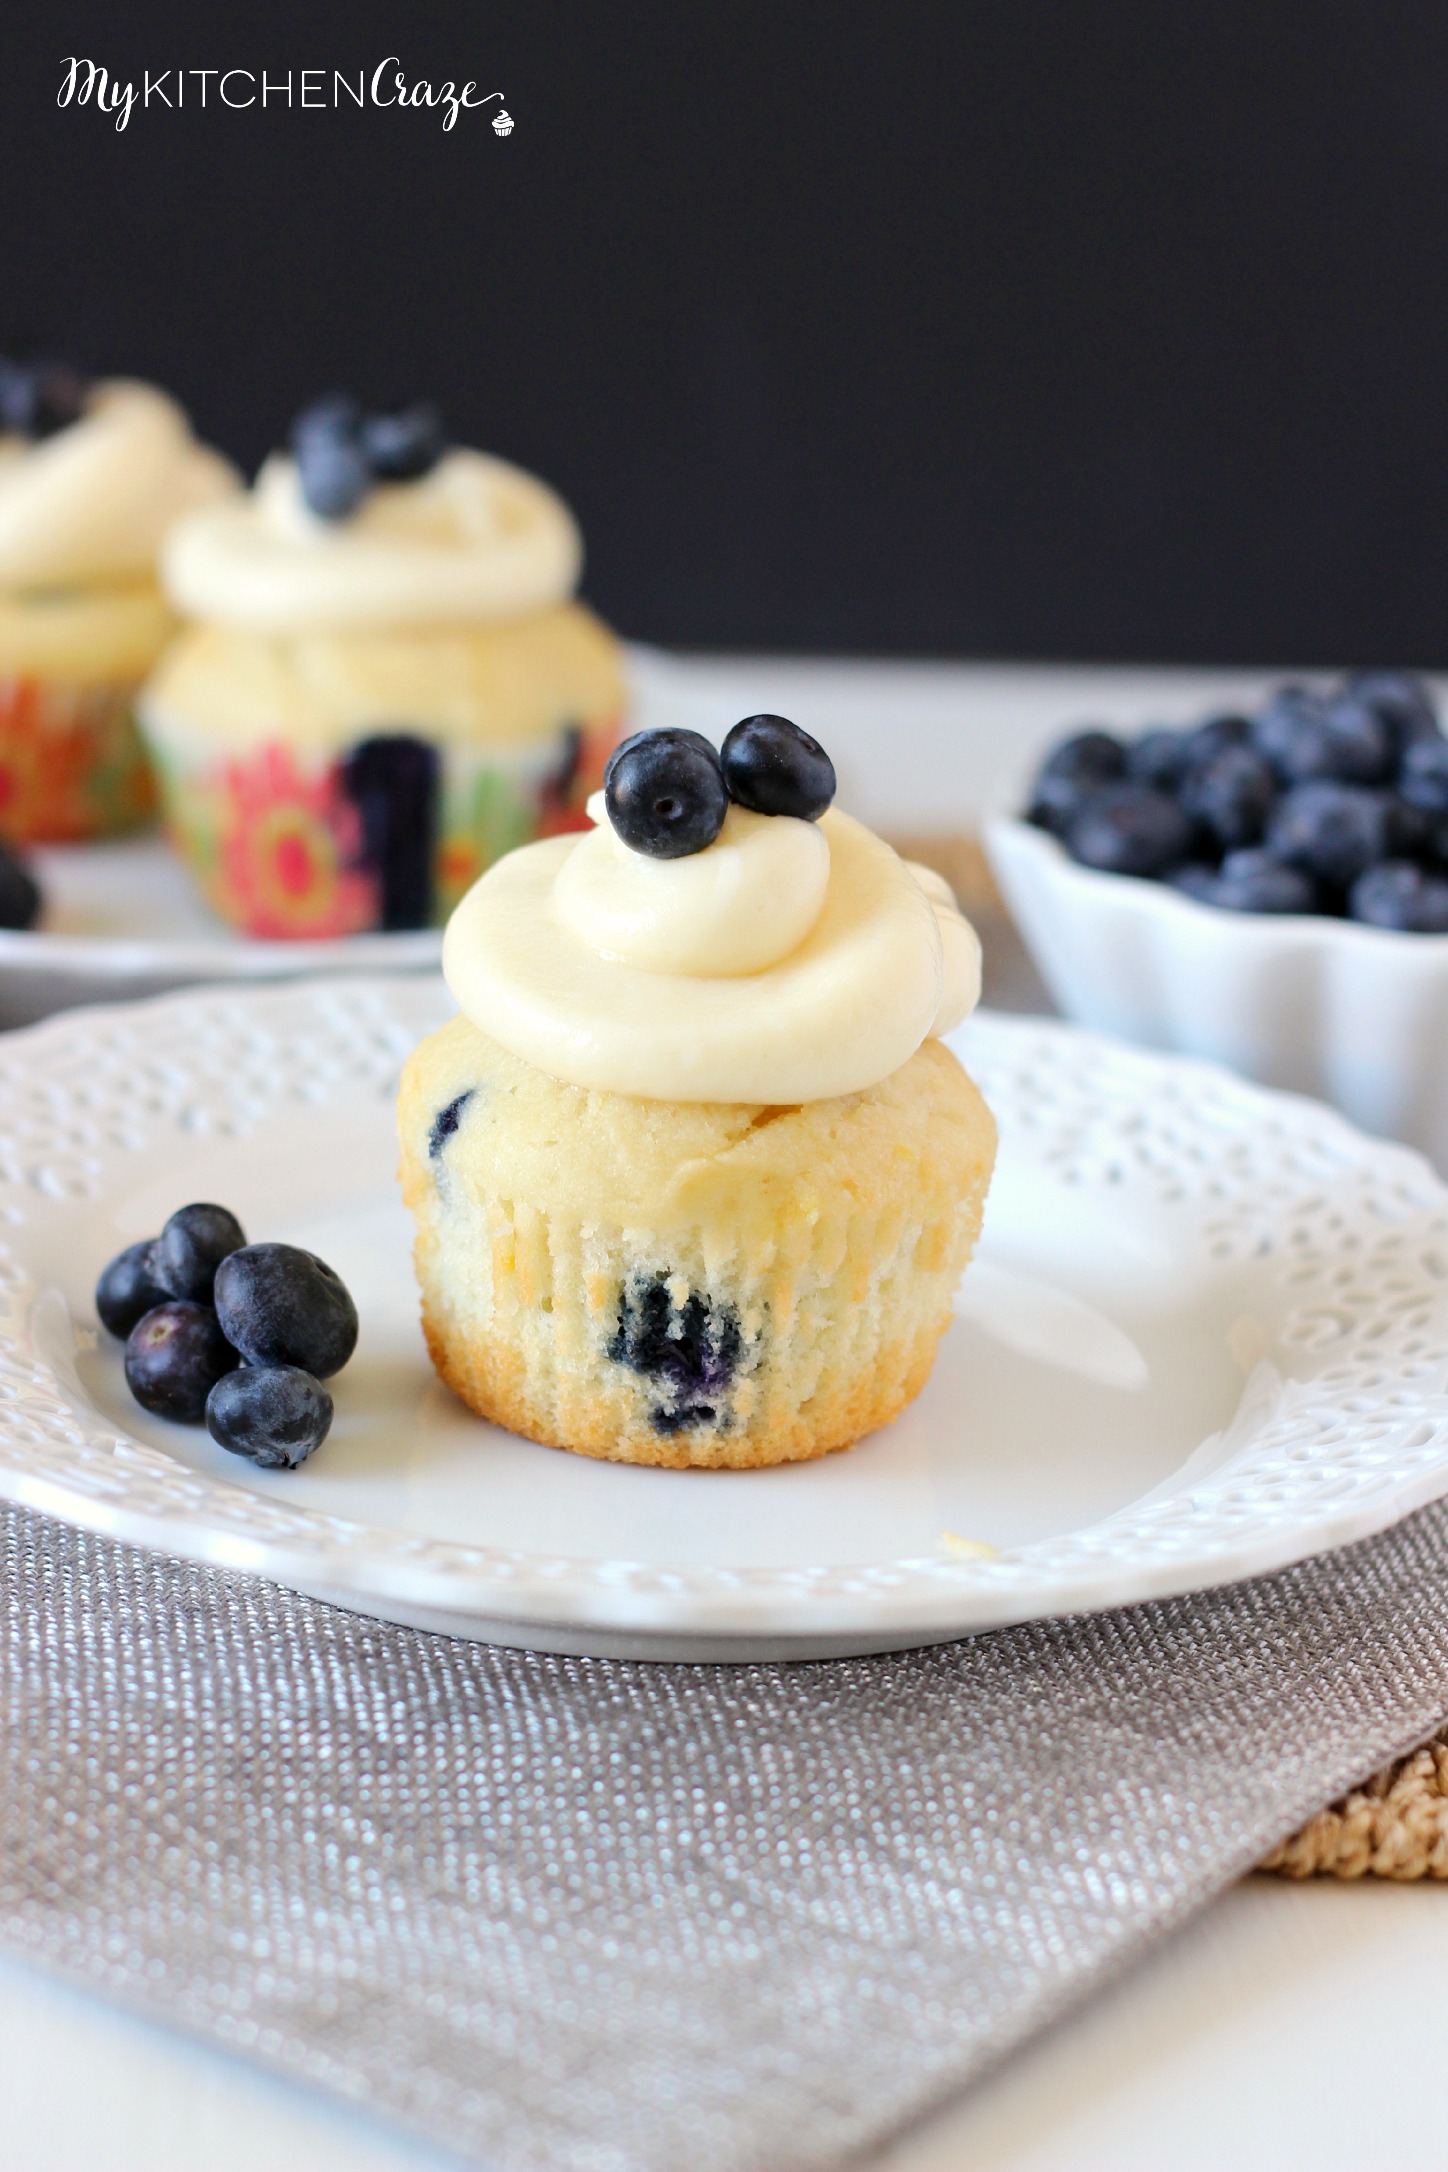 Lemon Blueberry Cupcakes ~ mykitchencraze.com ~ A moist cupcake filled with juicy blueberries and lemon zest. Topped with a delicious cream cheese frosting.